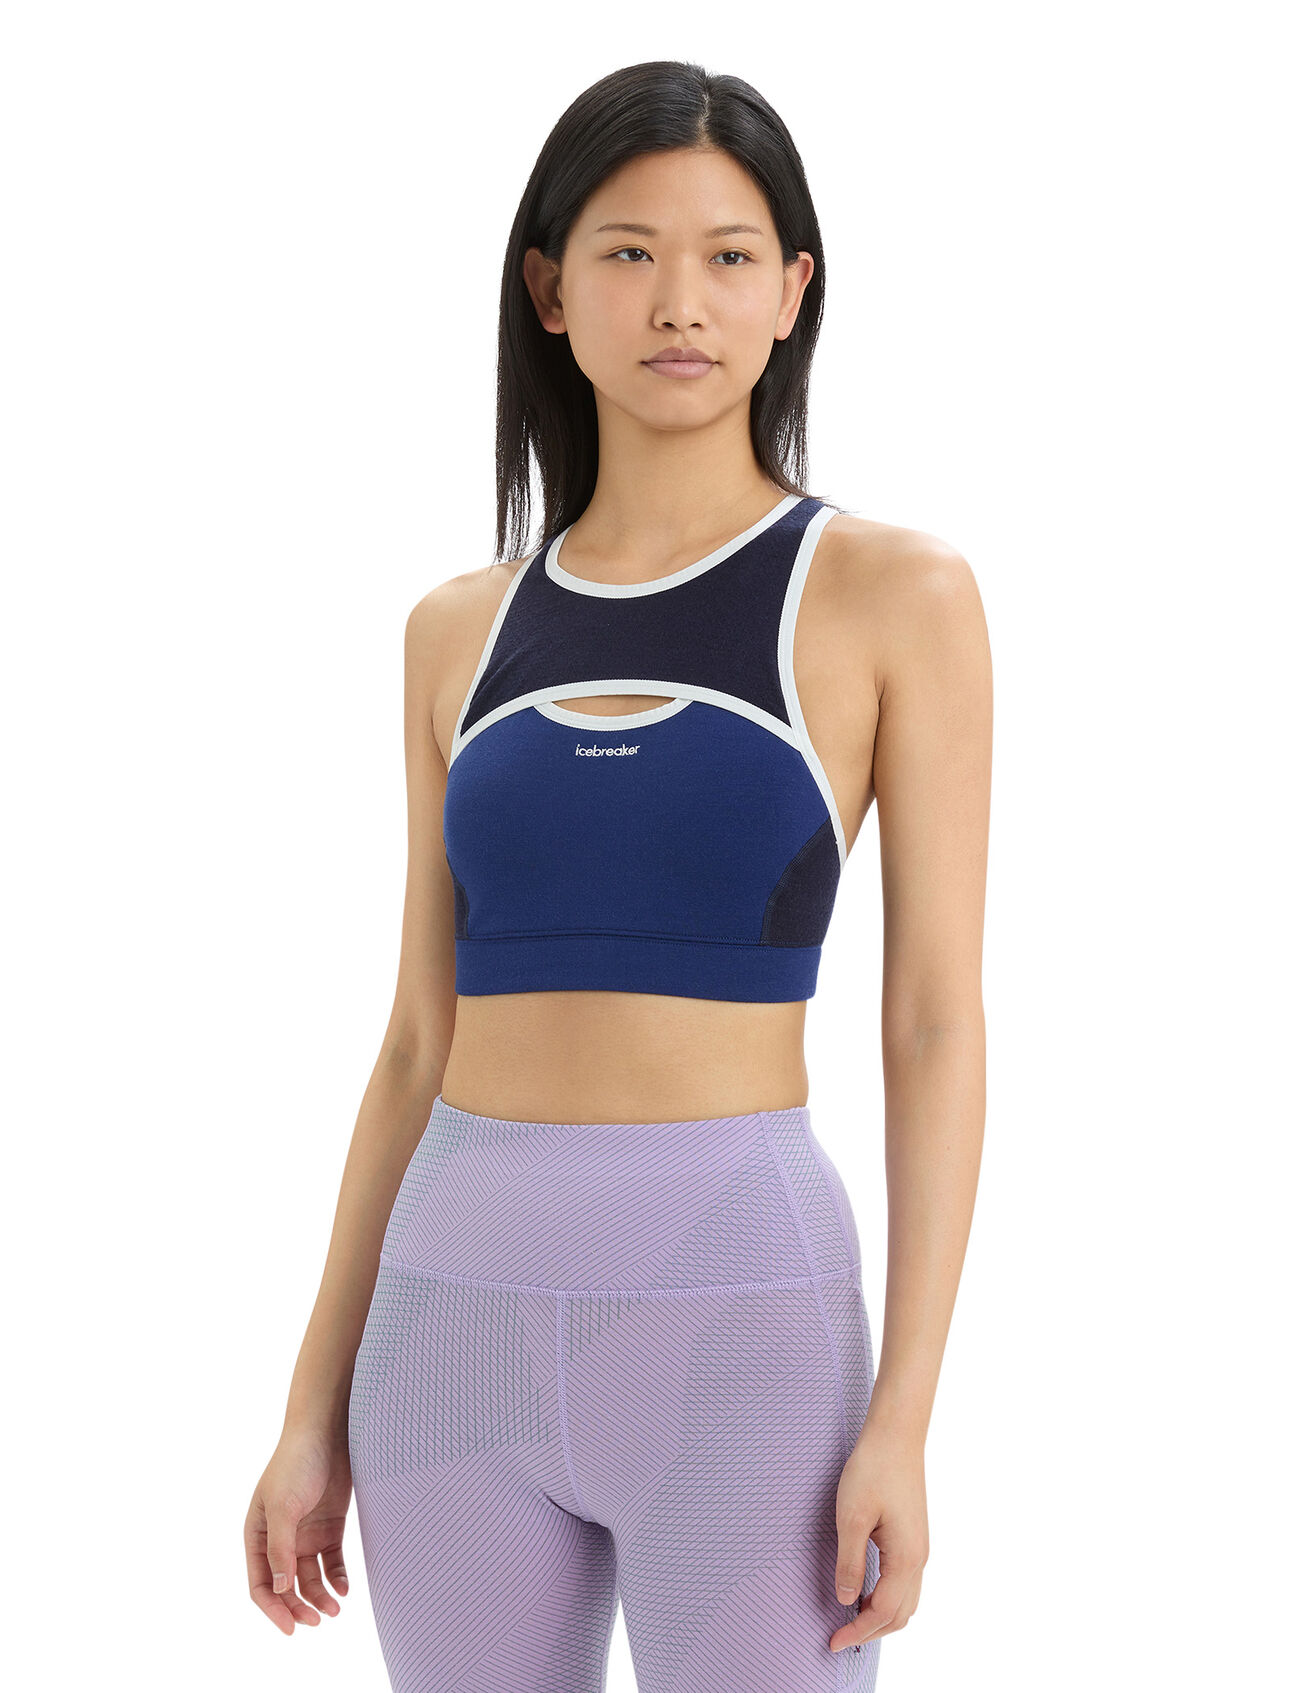 Womens ZoneKnit™ Merino Sport Bra A soft, supportive and highly technical bra that features body-mapped mesh panelling for superior ventilation, the Zoneknit™ Sport Bra helps regulate your body temperature when you're on the move.